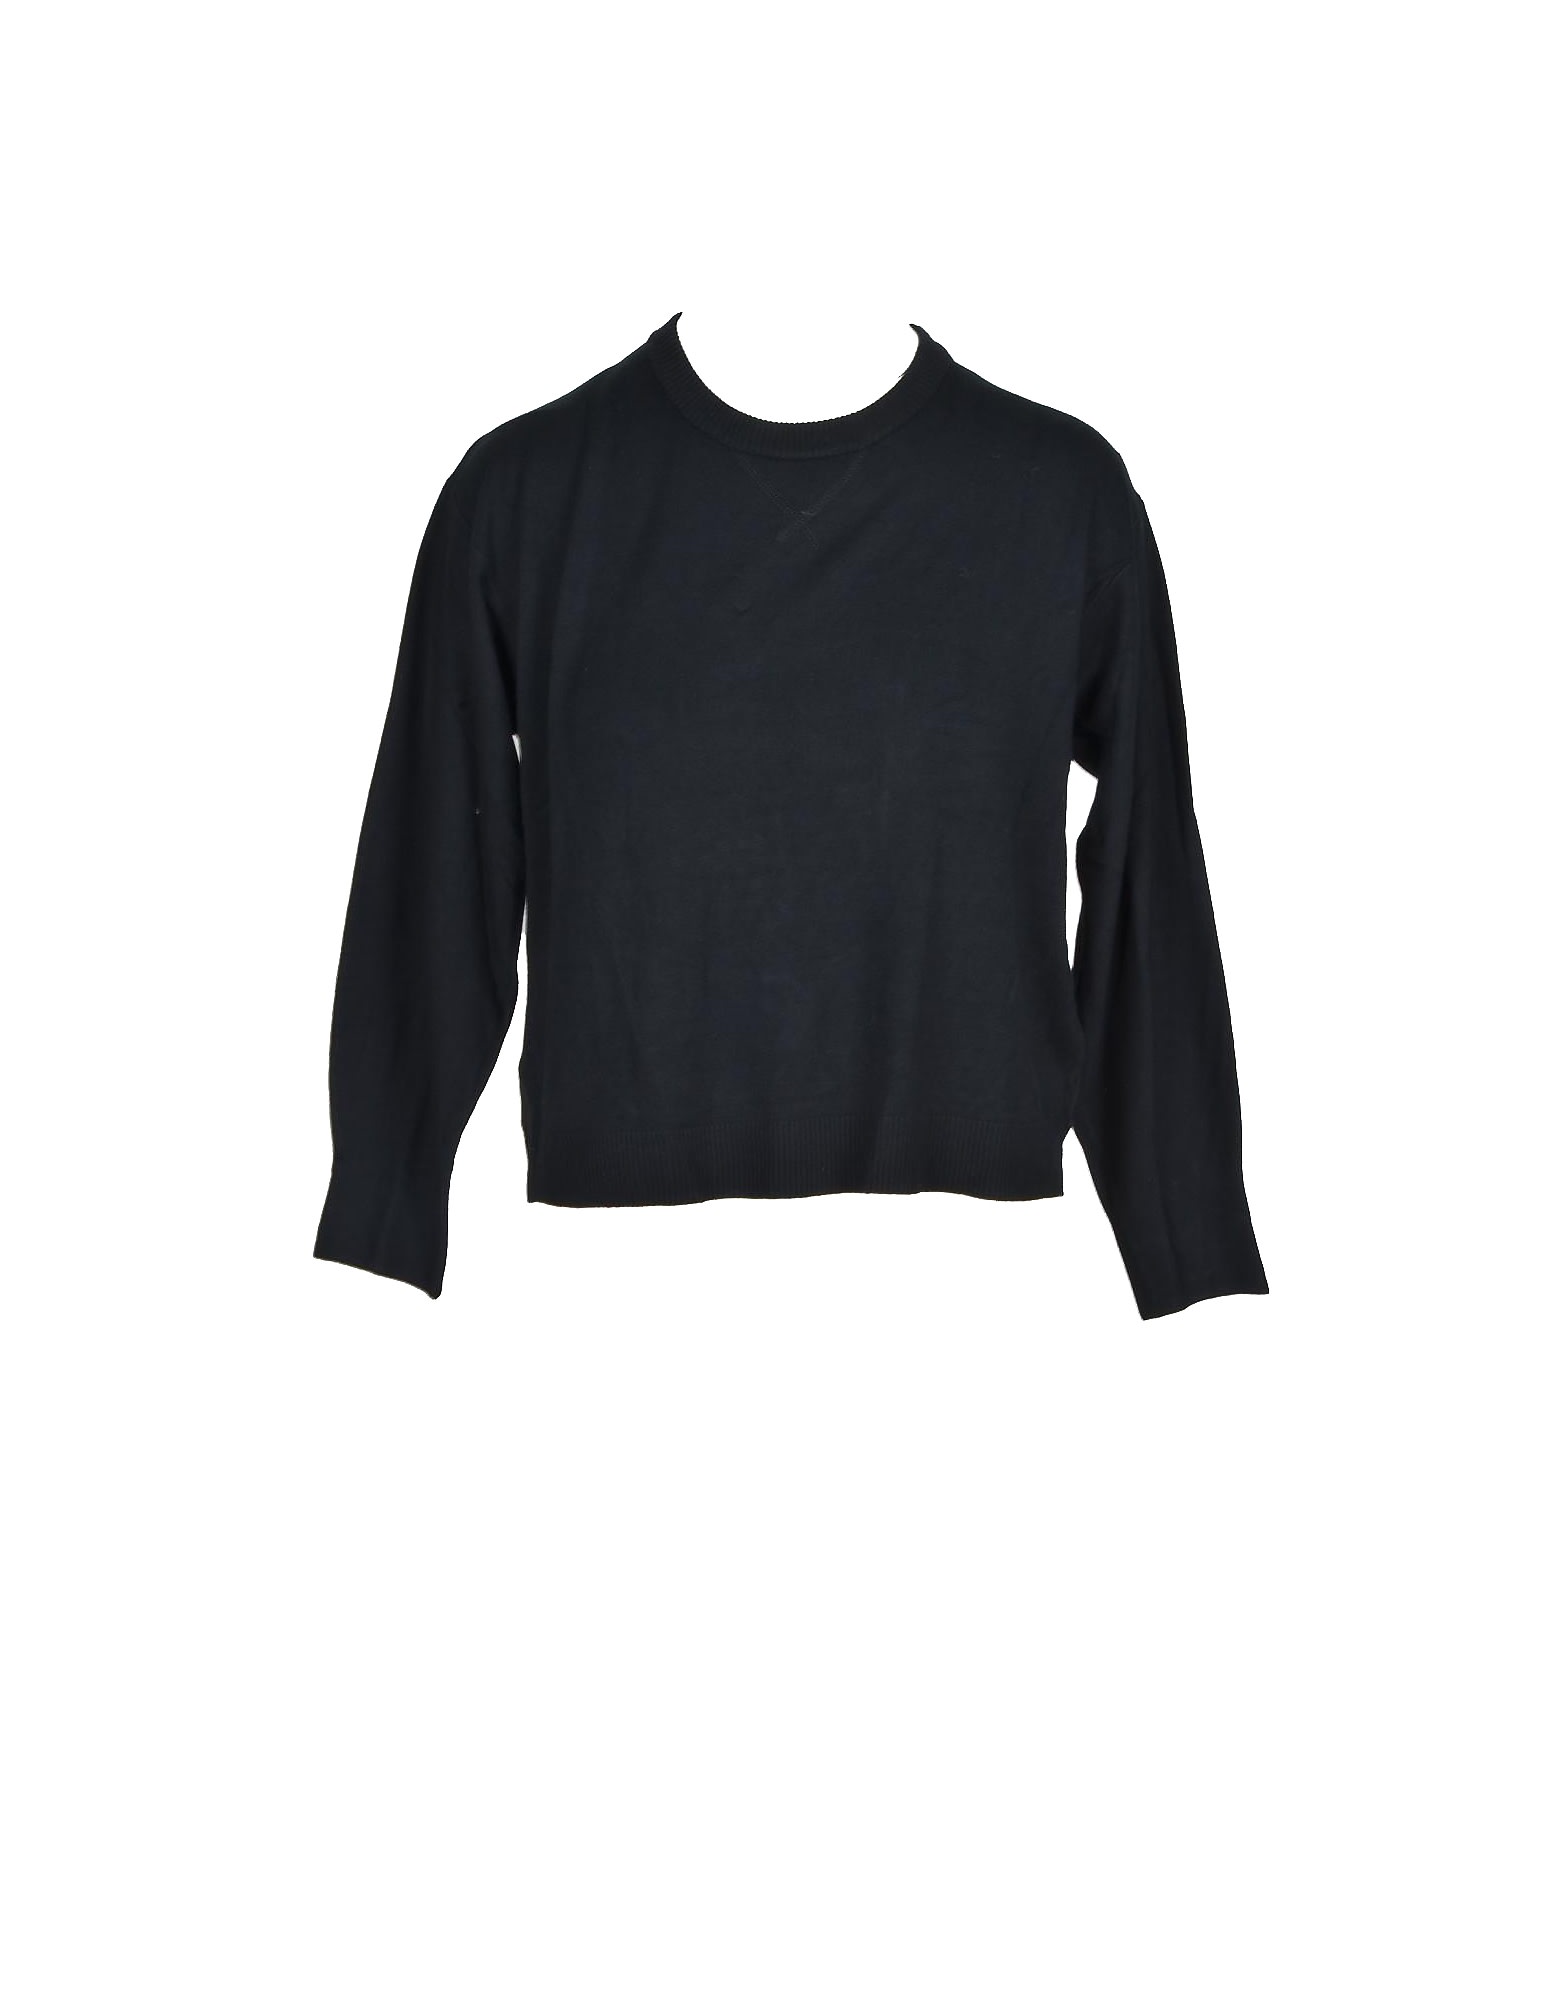 Guess Womens Black Sweater